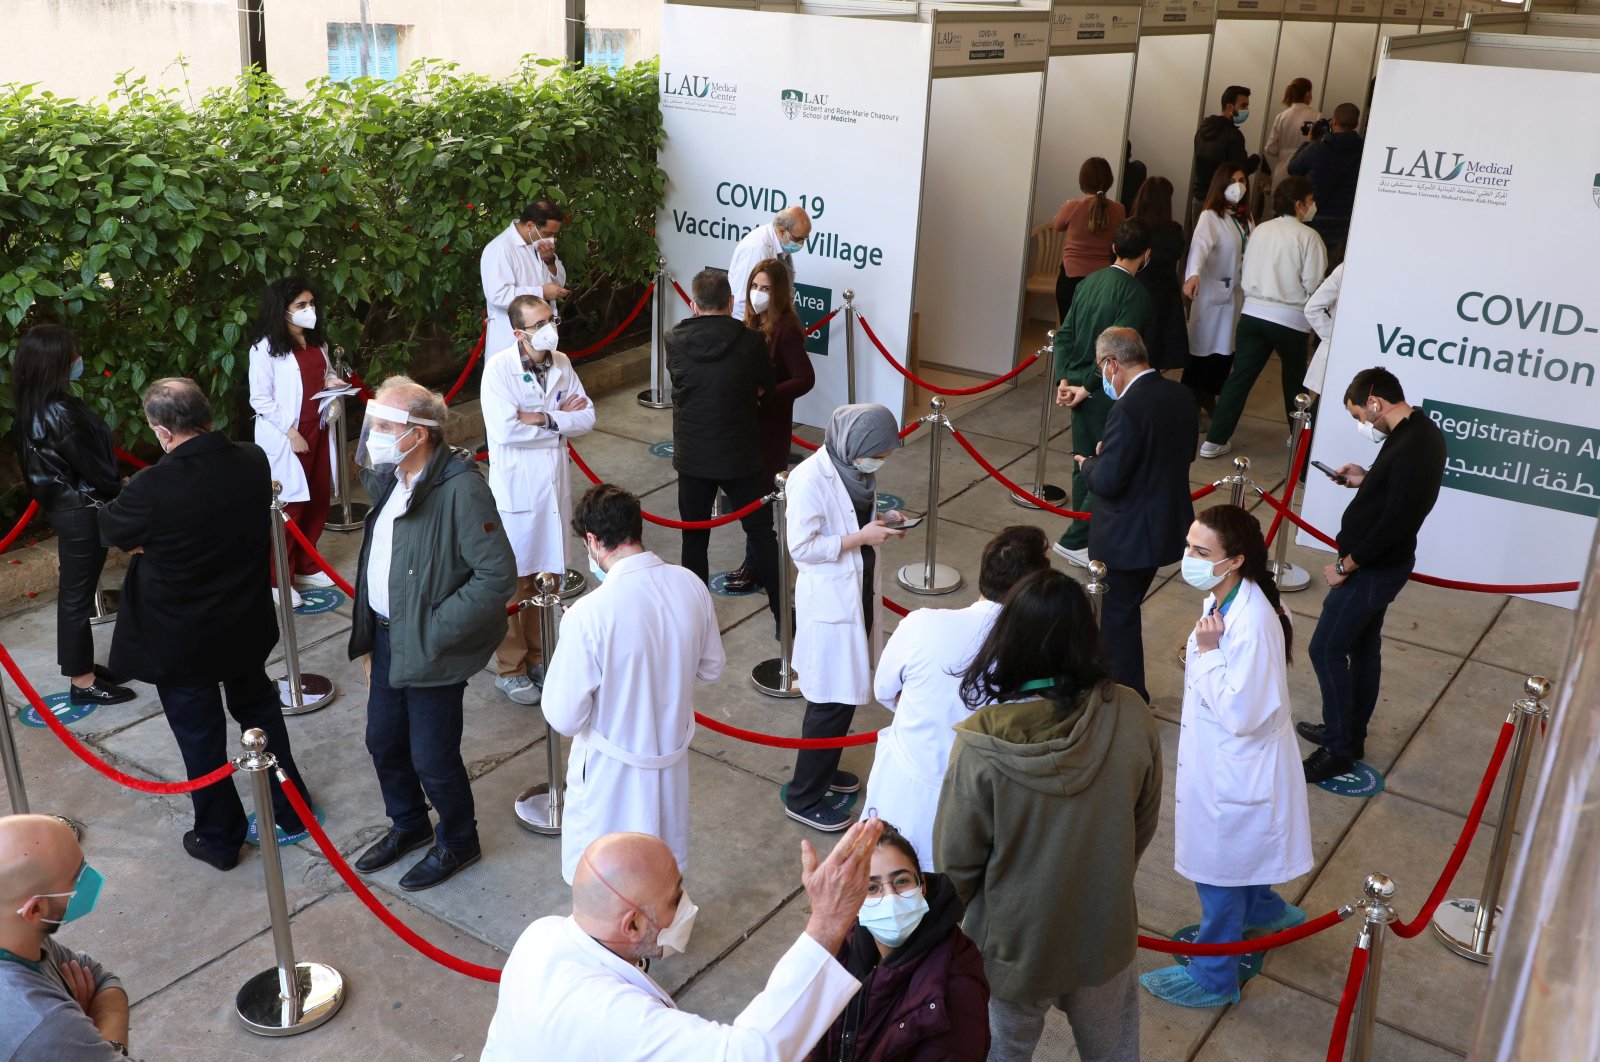 Health care workers wait to receive the Pfizer/BioNTech COVID-19 vaccine during a coronavirus vaccination campaign at Lebanese American University Medical Center-Rizk Hospital in Beirut, Lebanon, Feb. 16, 2021. (Reuters Photo)